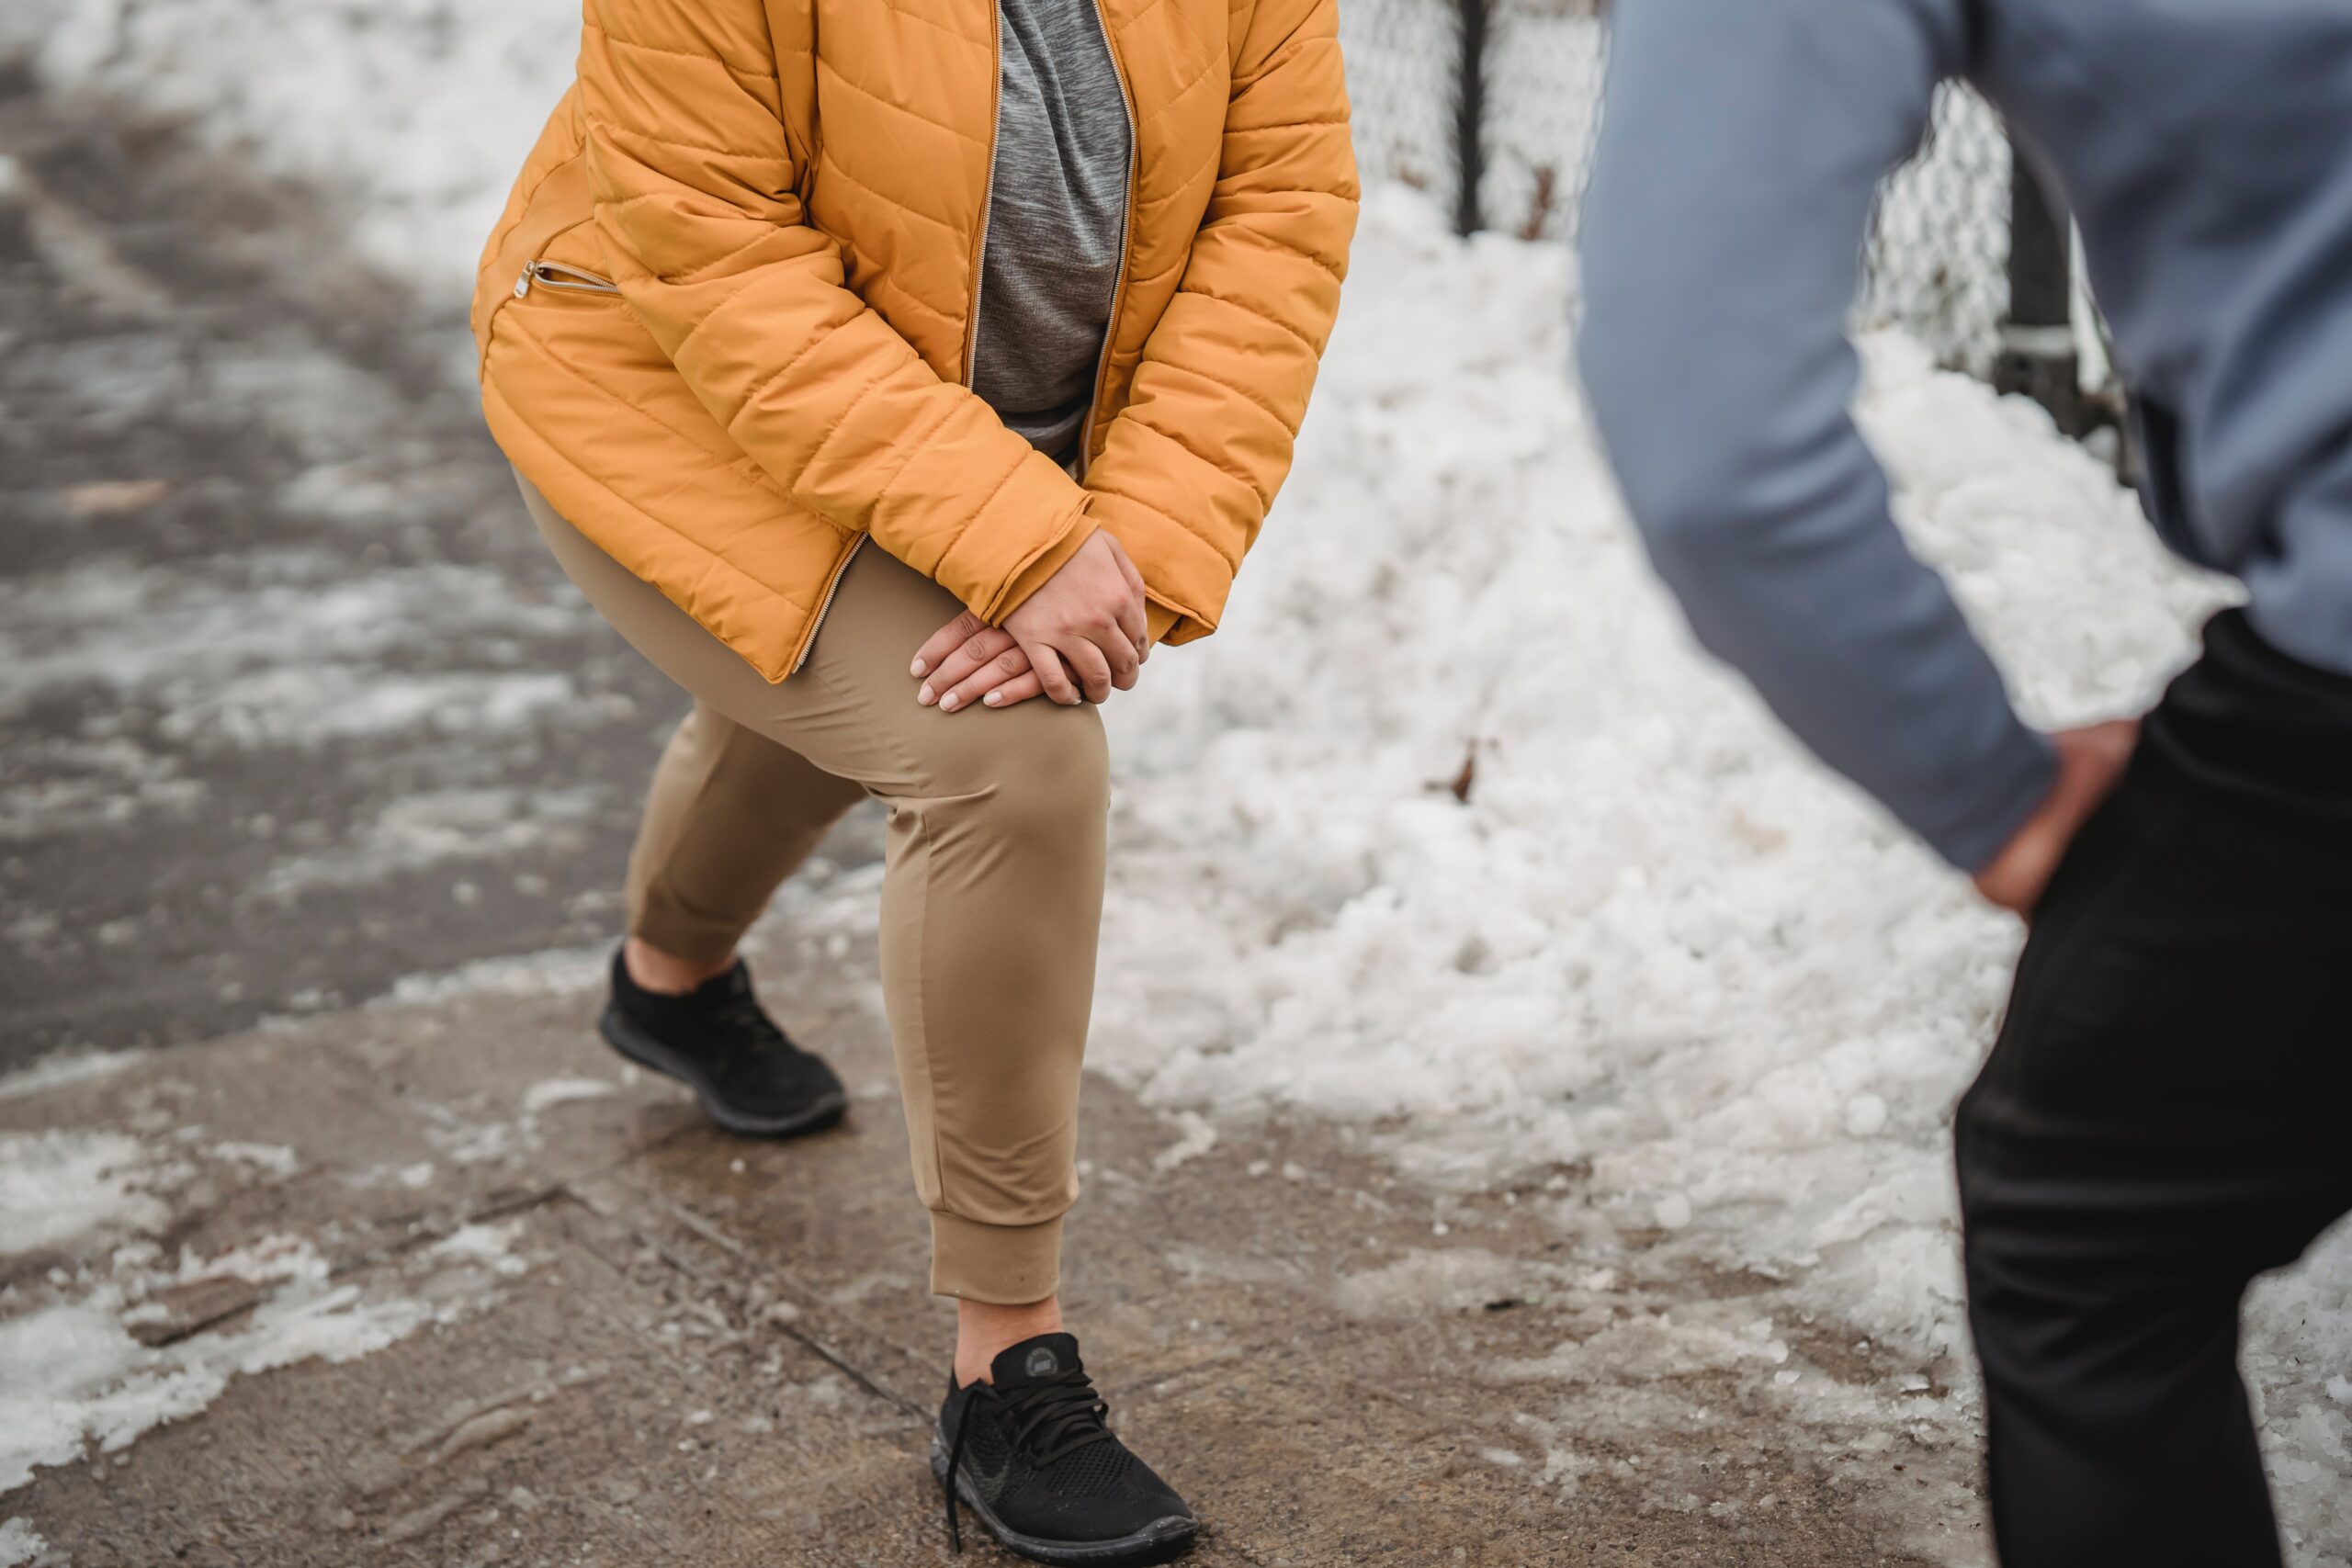 lunges with snow on ground